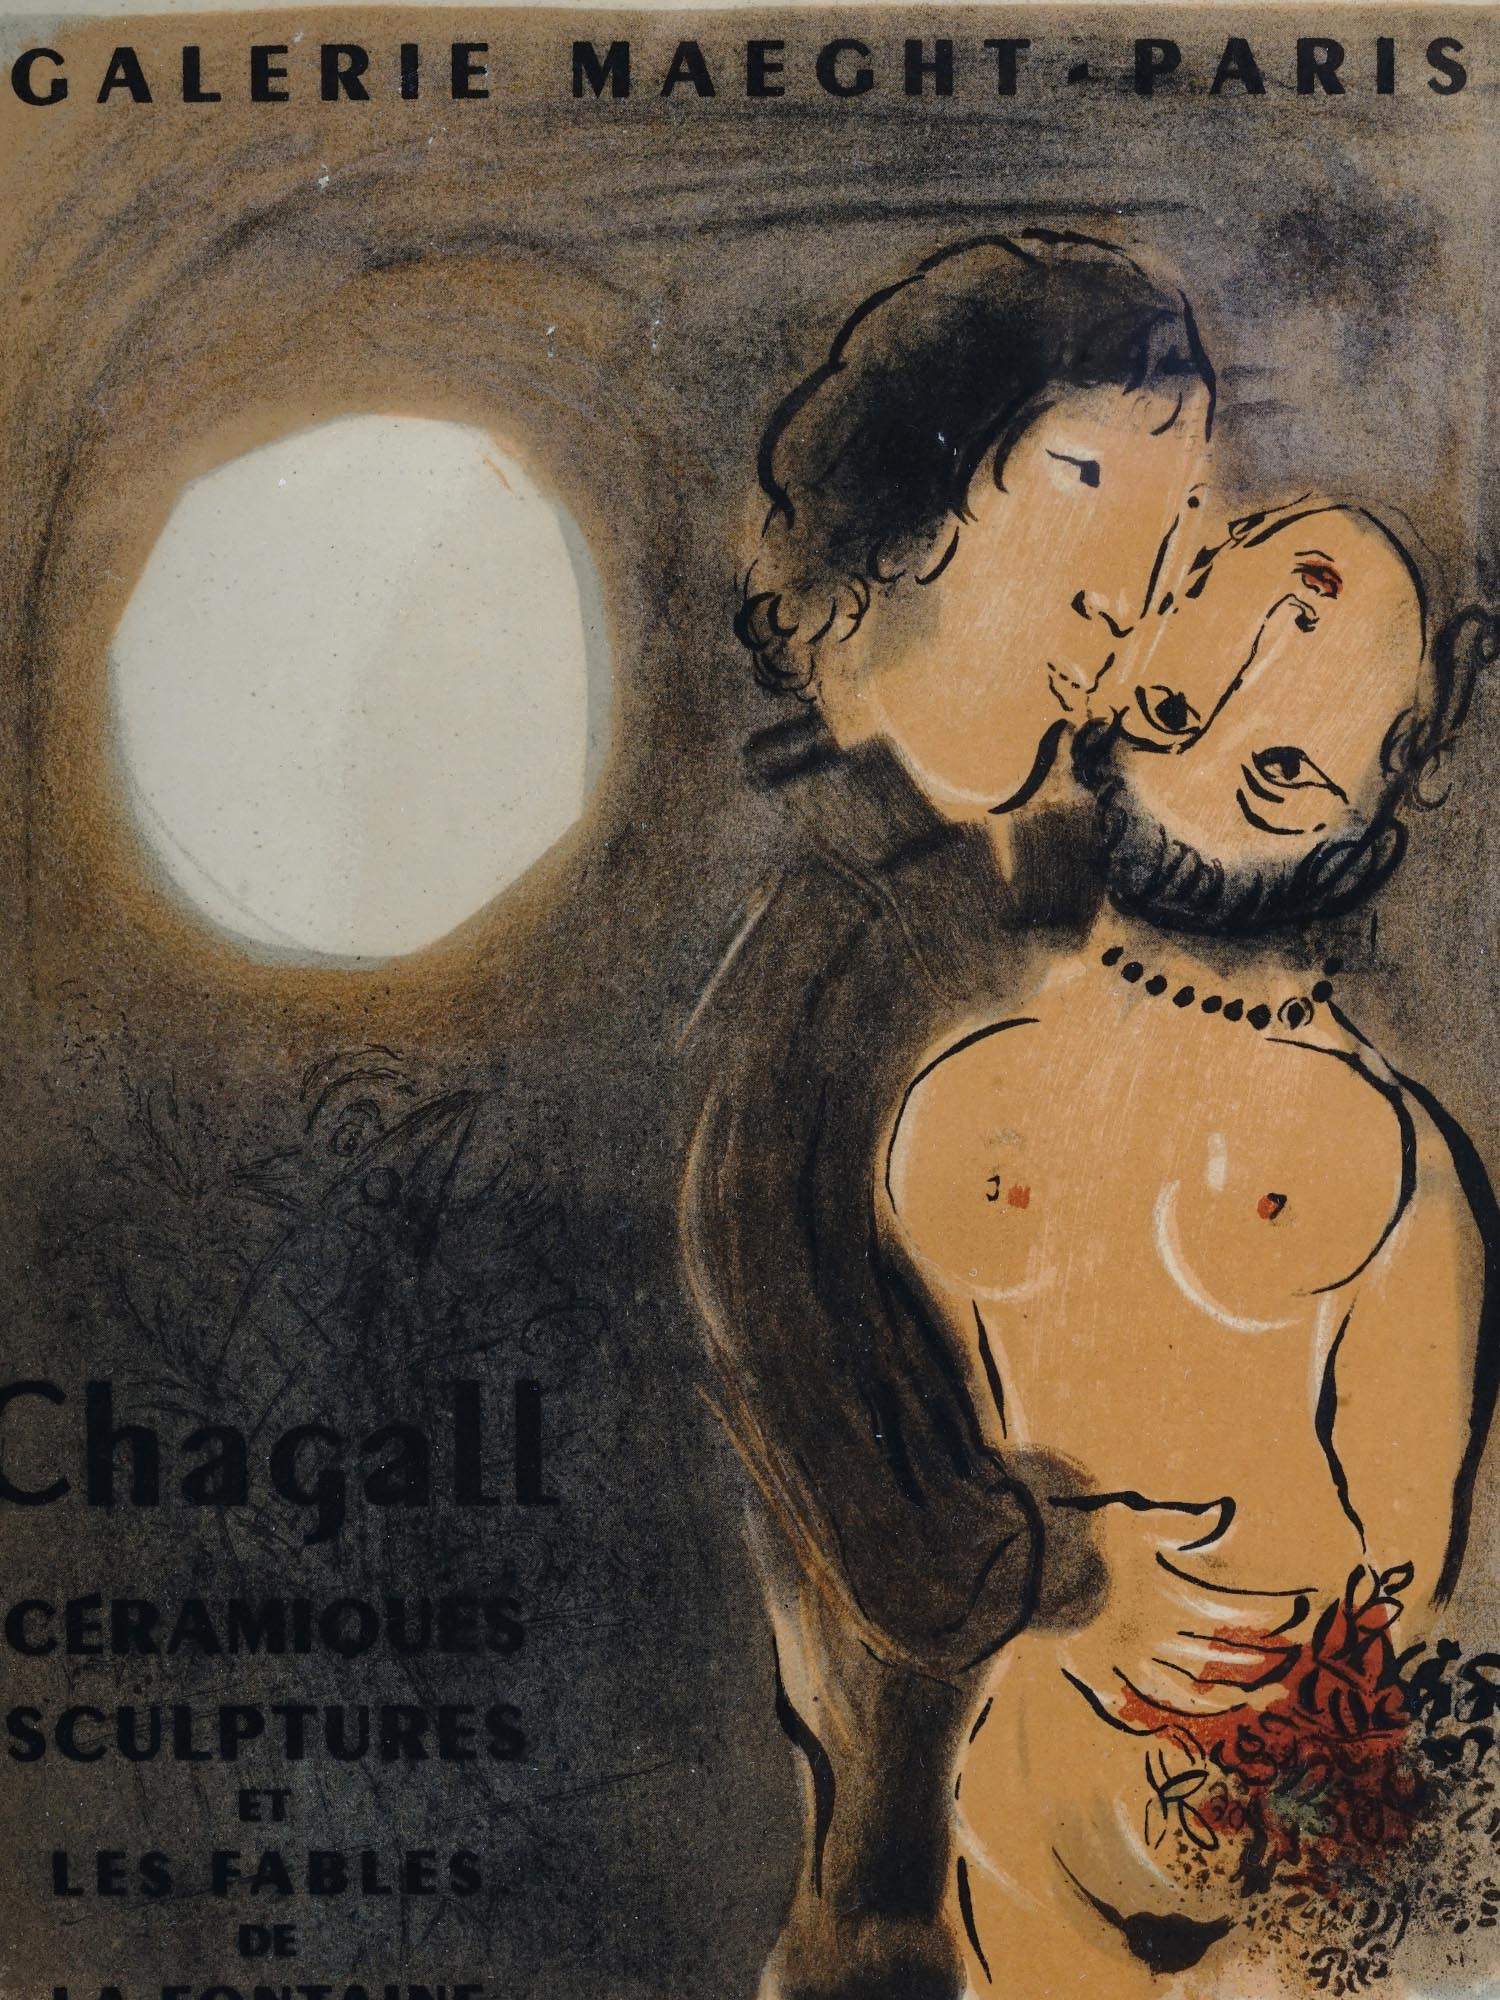 GALERIE MAECHT EXHIBITION POSTER BY MARC CHAGALL PIC-1